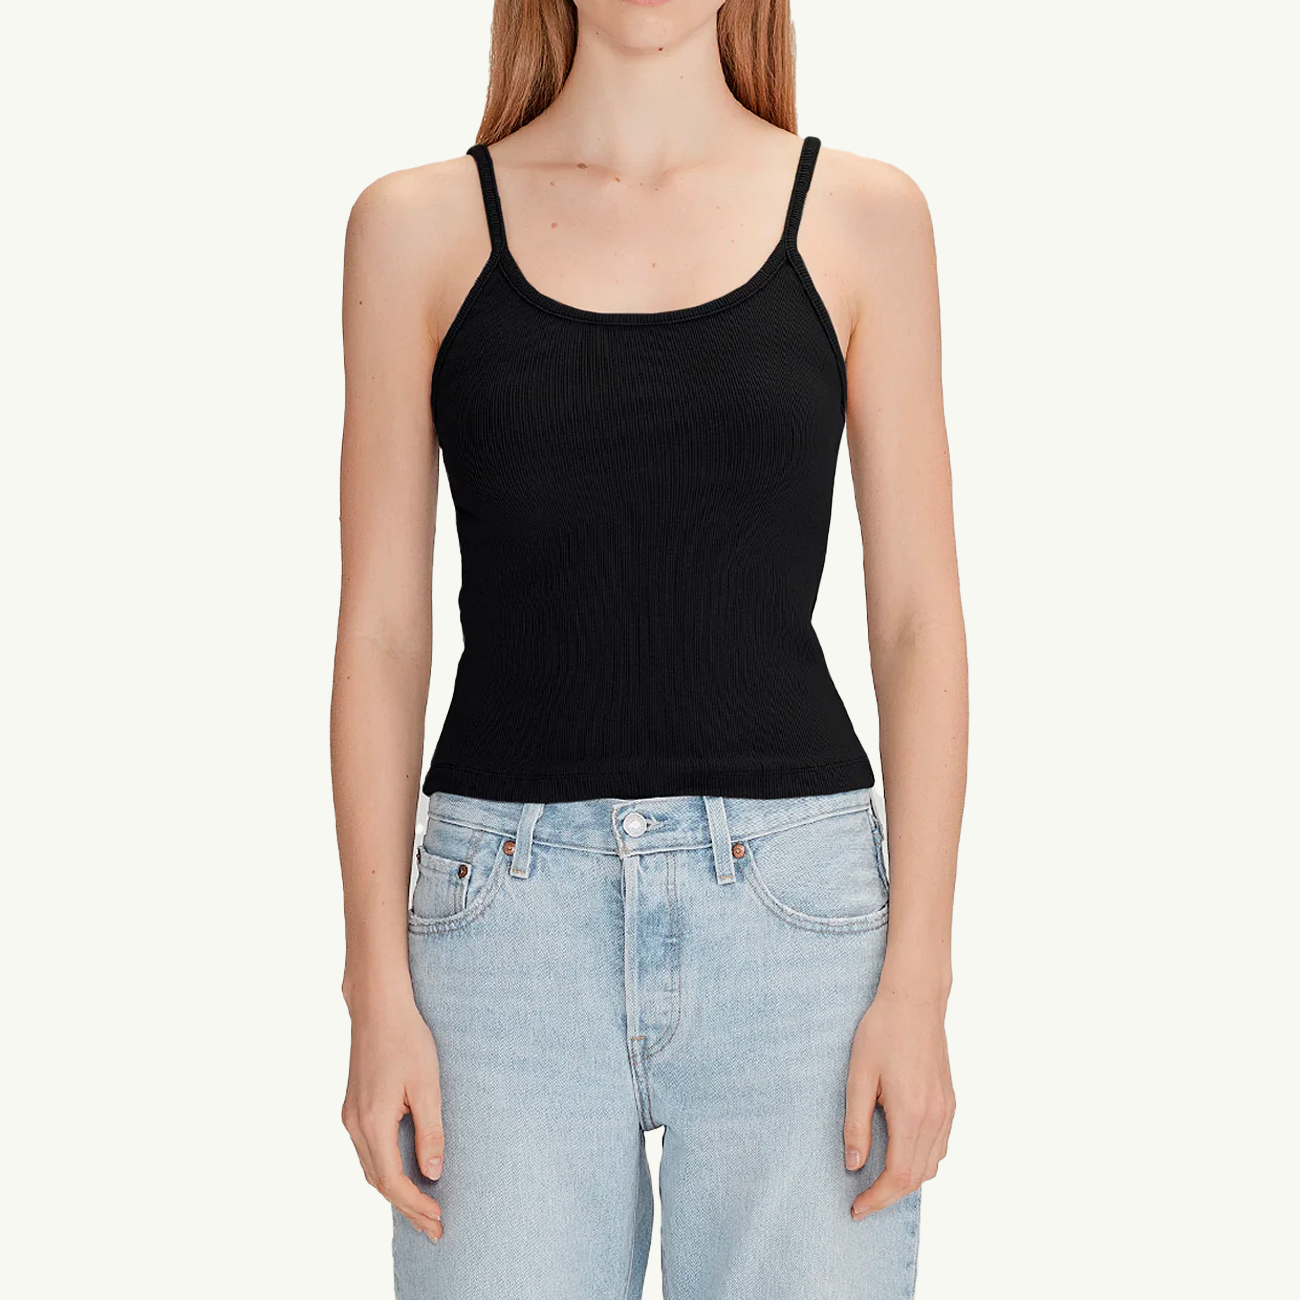 Women's Fitted Rib Cami - Black